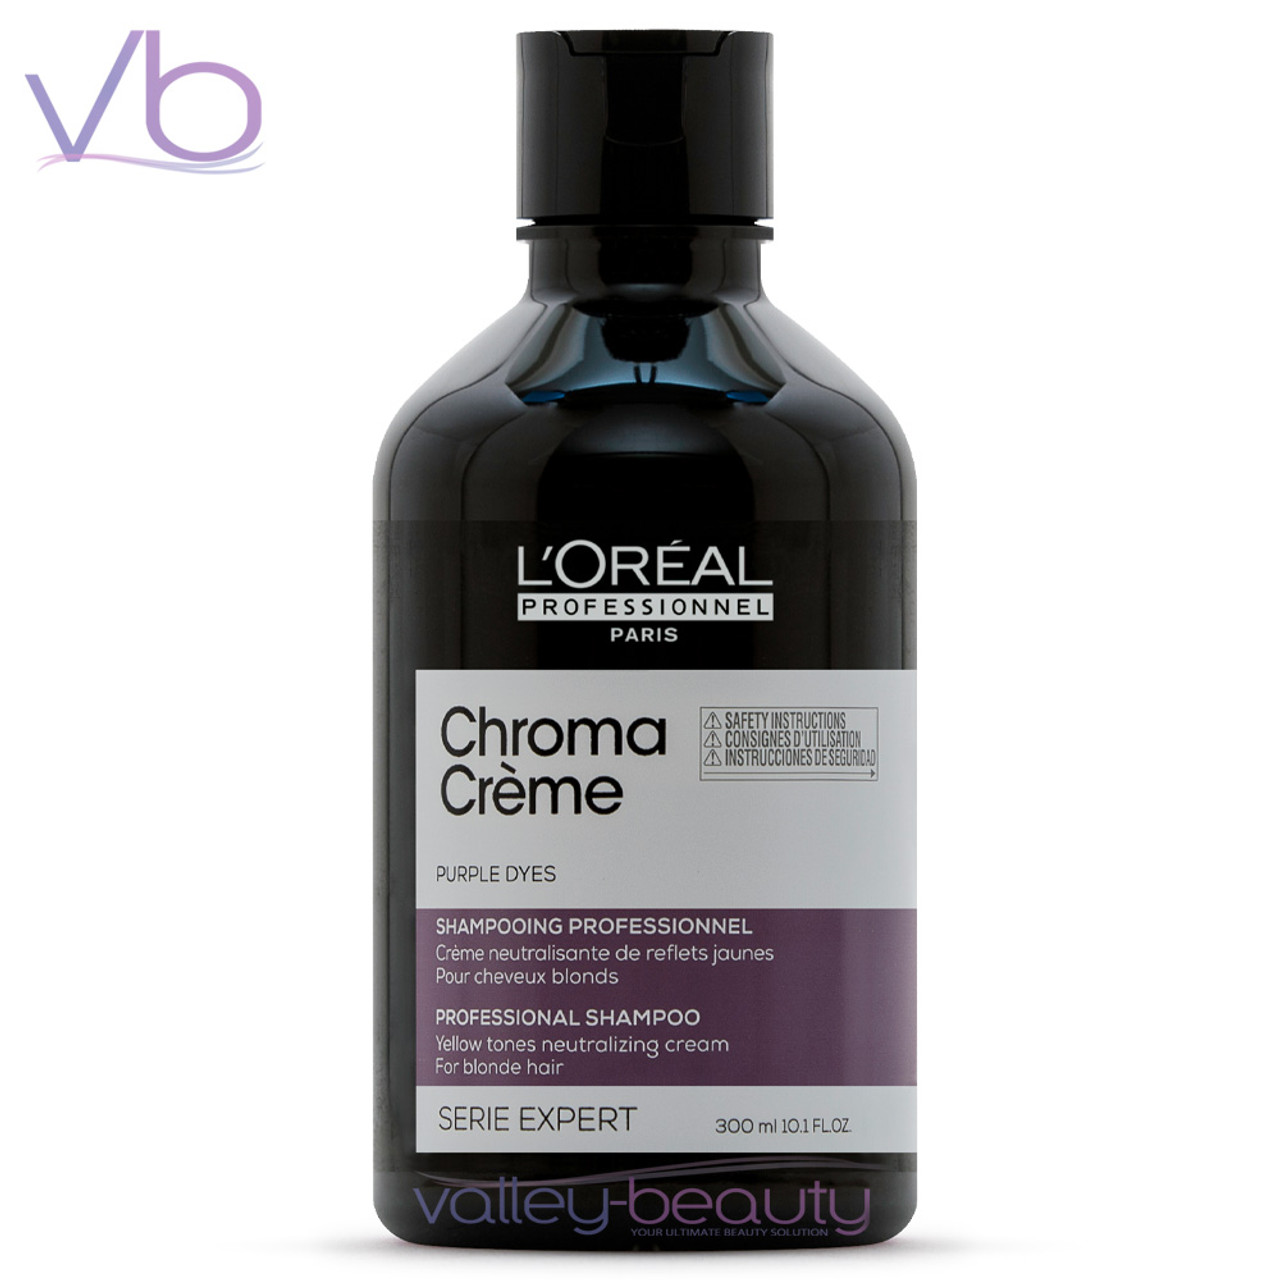 L'Oreal L’Oreal Professionnel Chroma Creme Purple Dyes Shampoo | Yellow Tones Neutralizing Cleanser for Blond, Platinum, Grey Hair 300ml